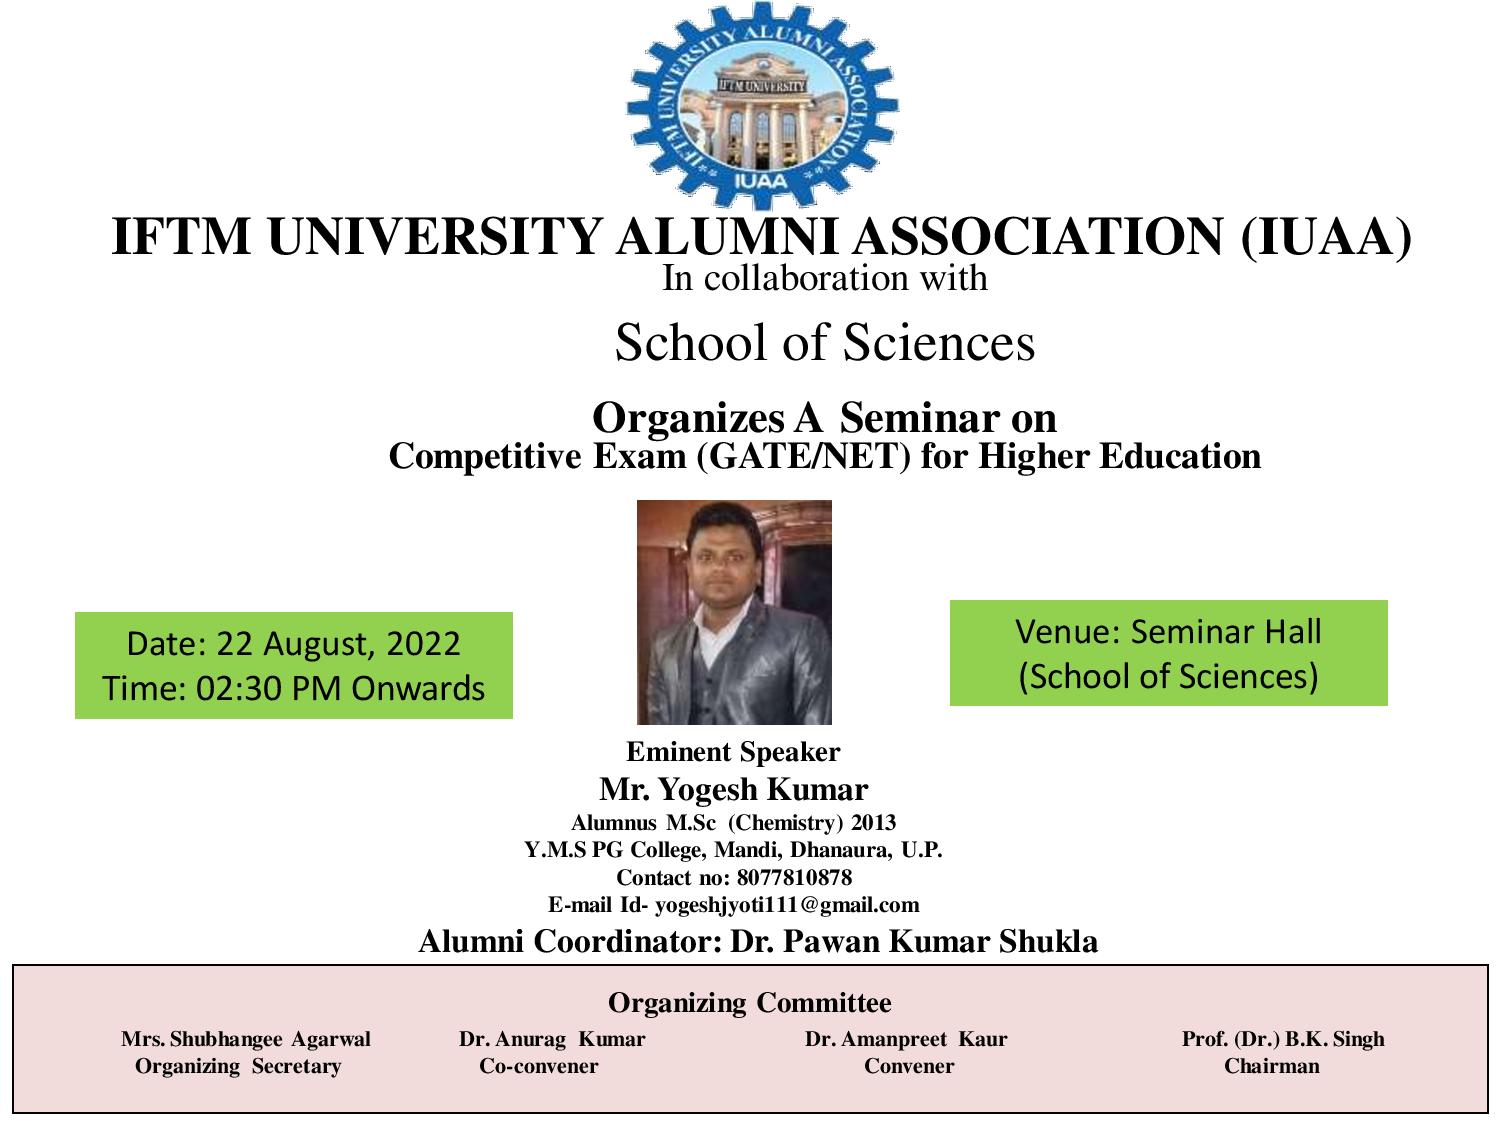 Seminar on Competitive Exam (GATE/NET) for Higher Education